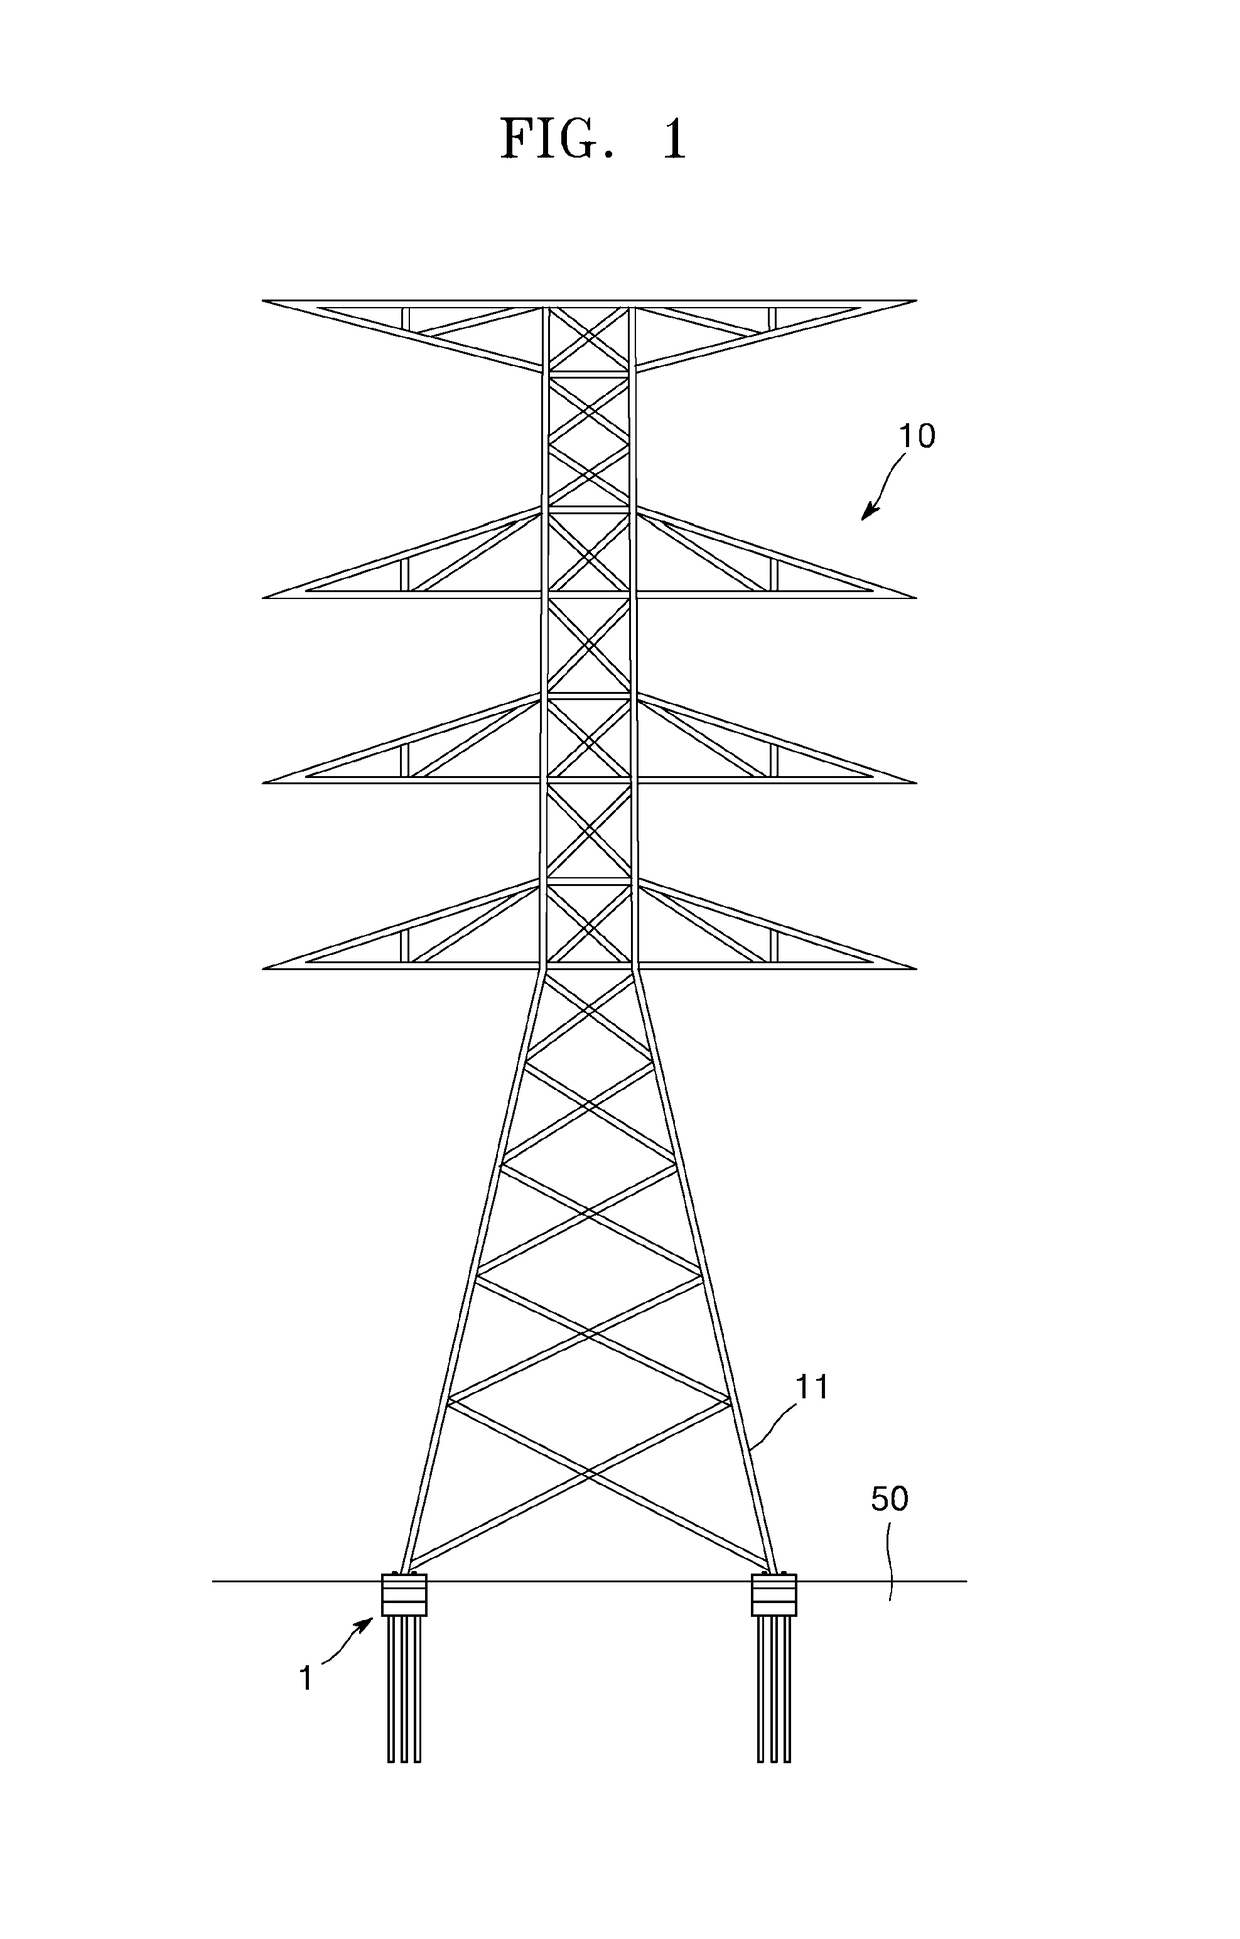 Base body of electric transmission tower using micropile